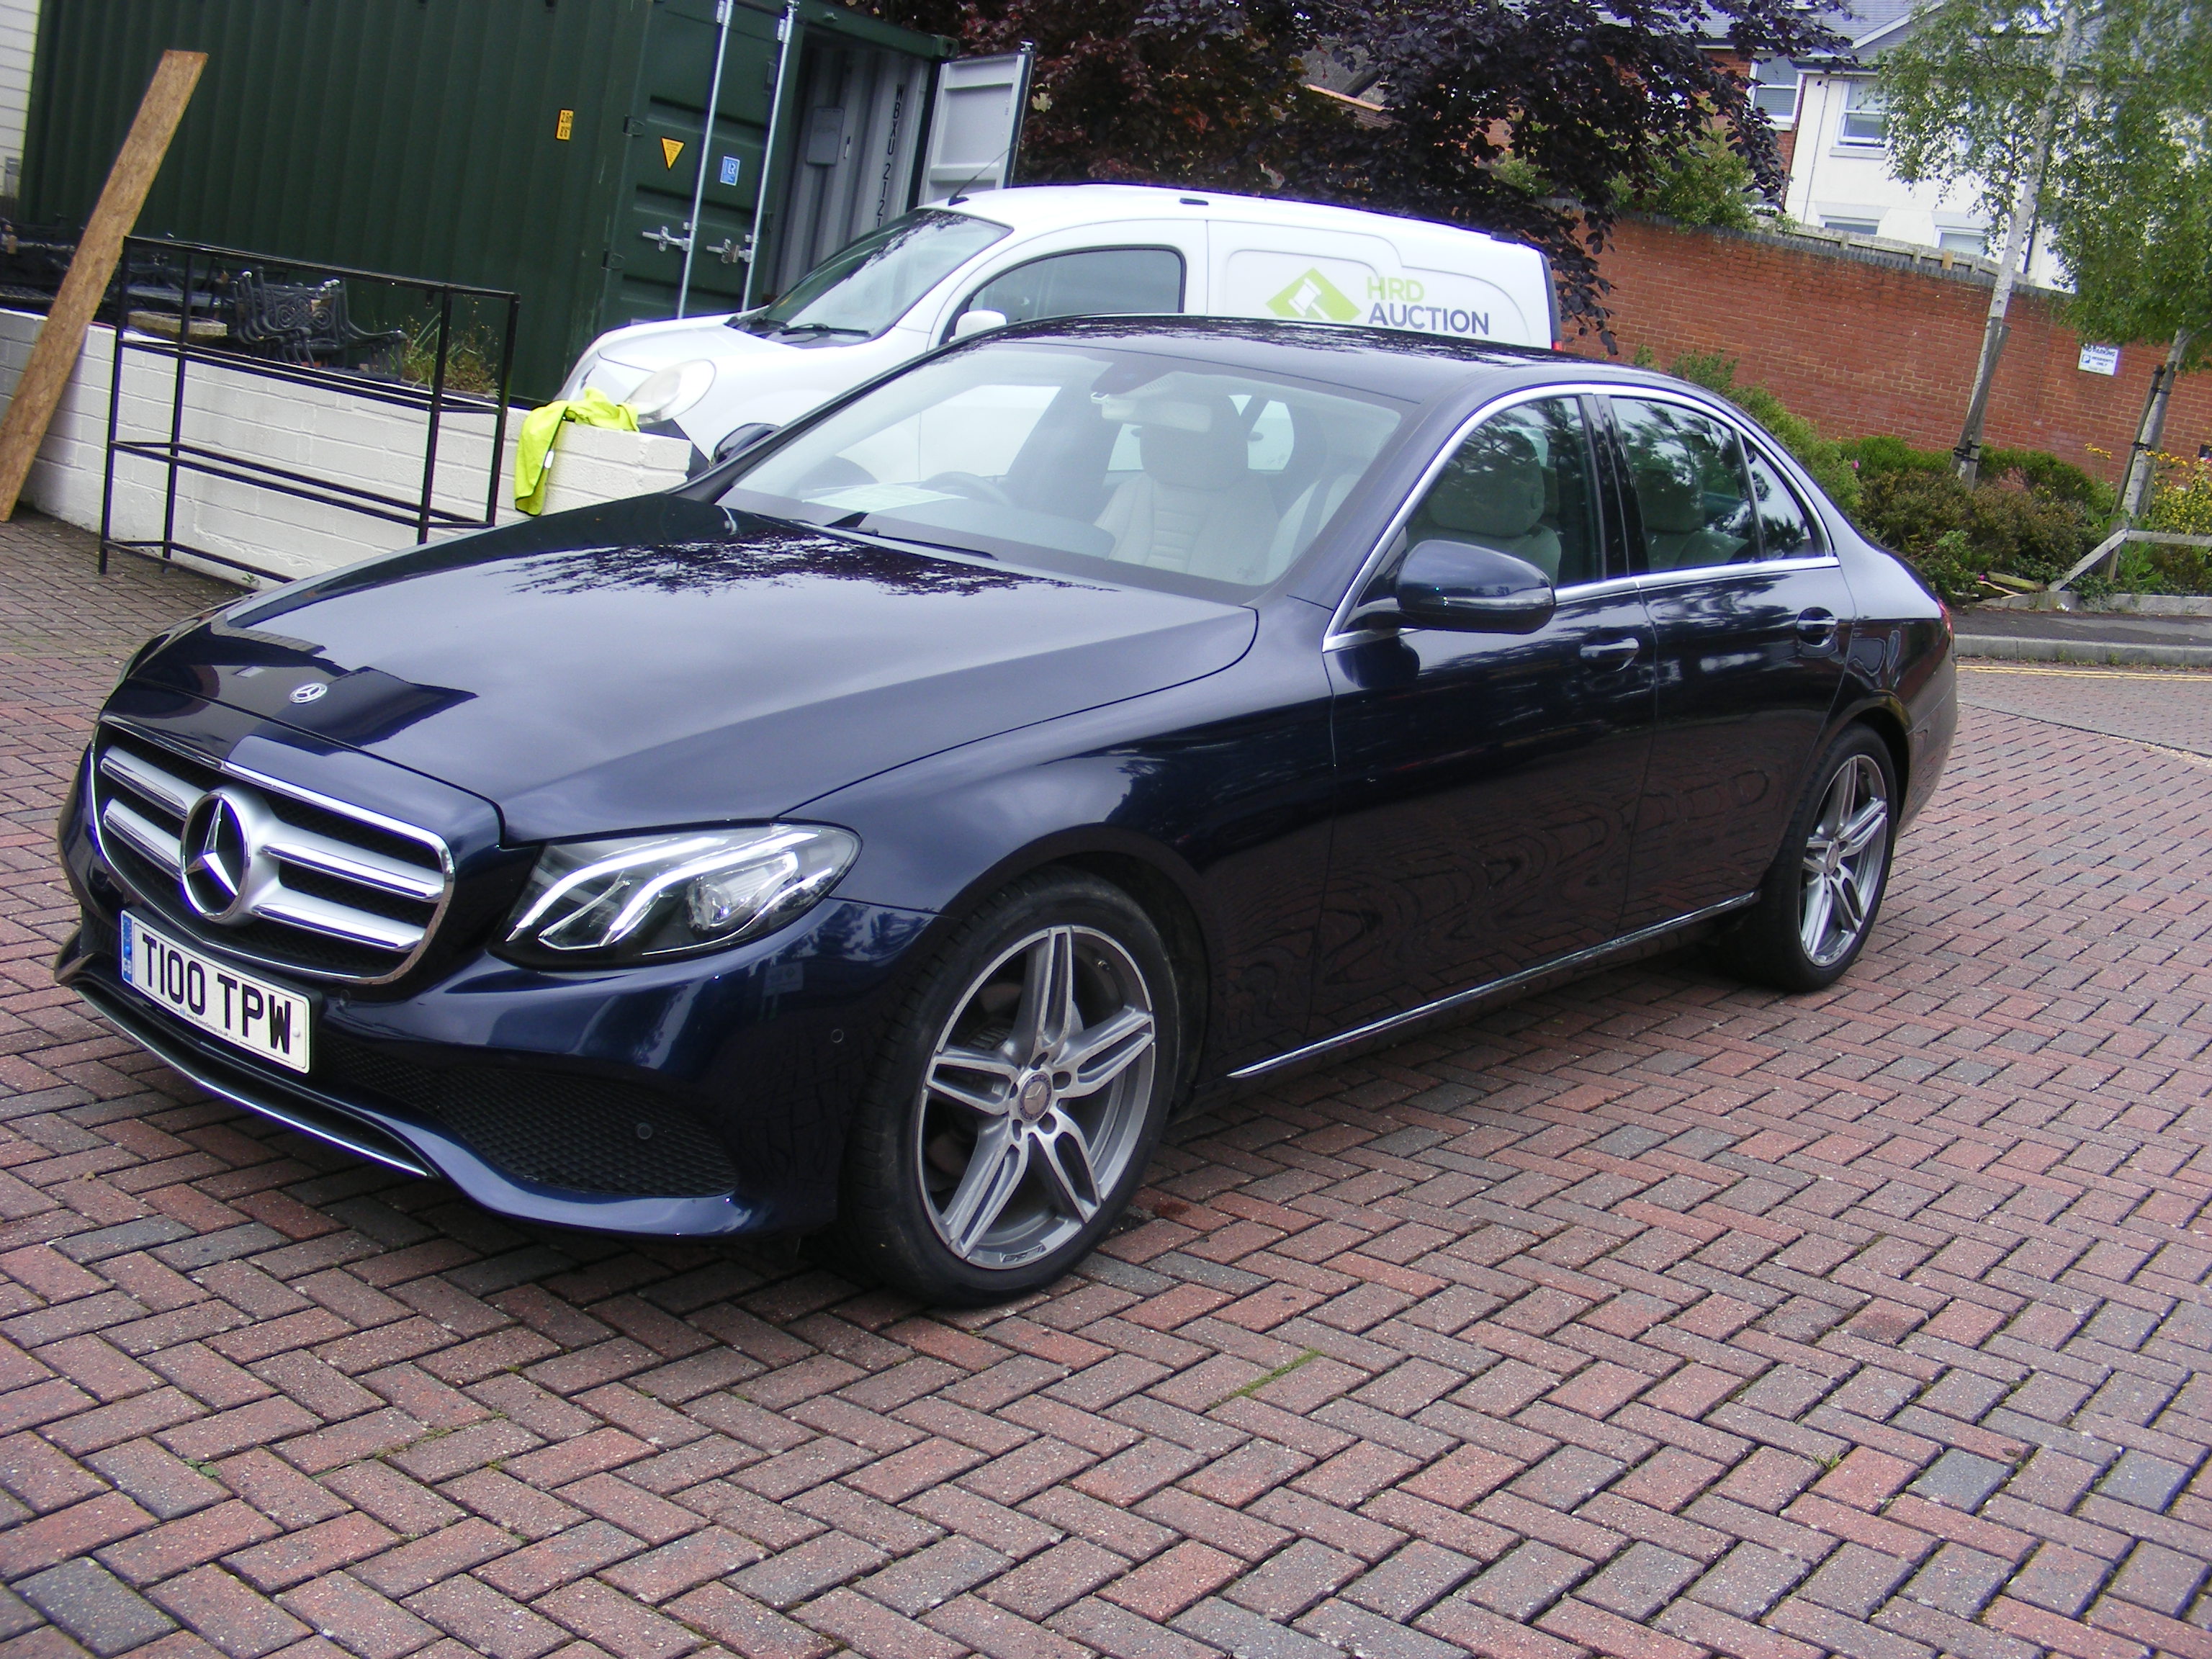 FROM A DECEASED'S ESTATE - Mercedes-Benz E 220 D S - Image 17 of 44